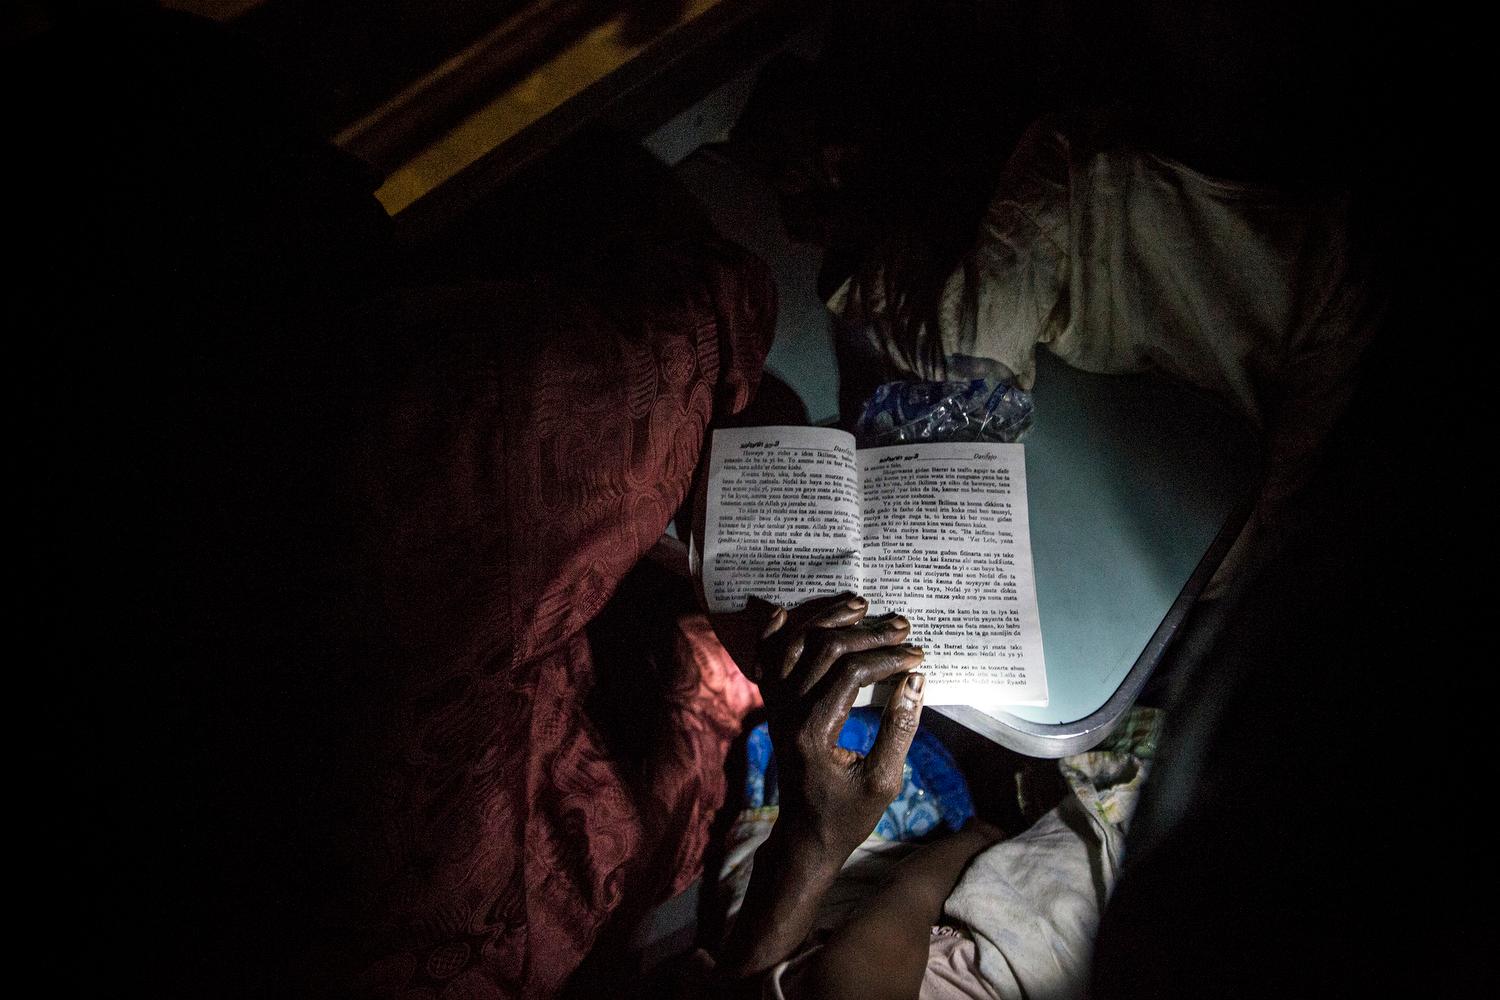 On a train home from Lagos to Kano, a Hausa woman reads a romance novel with the flashlight of her phone.